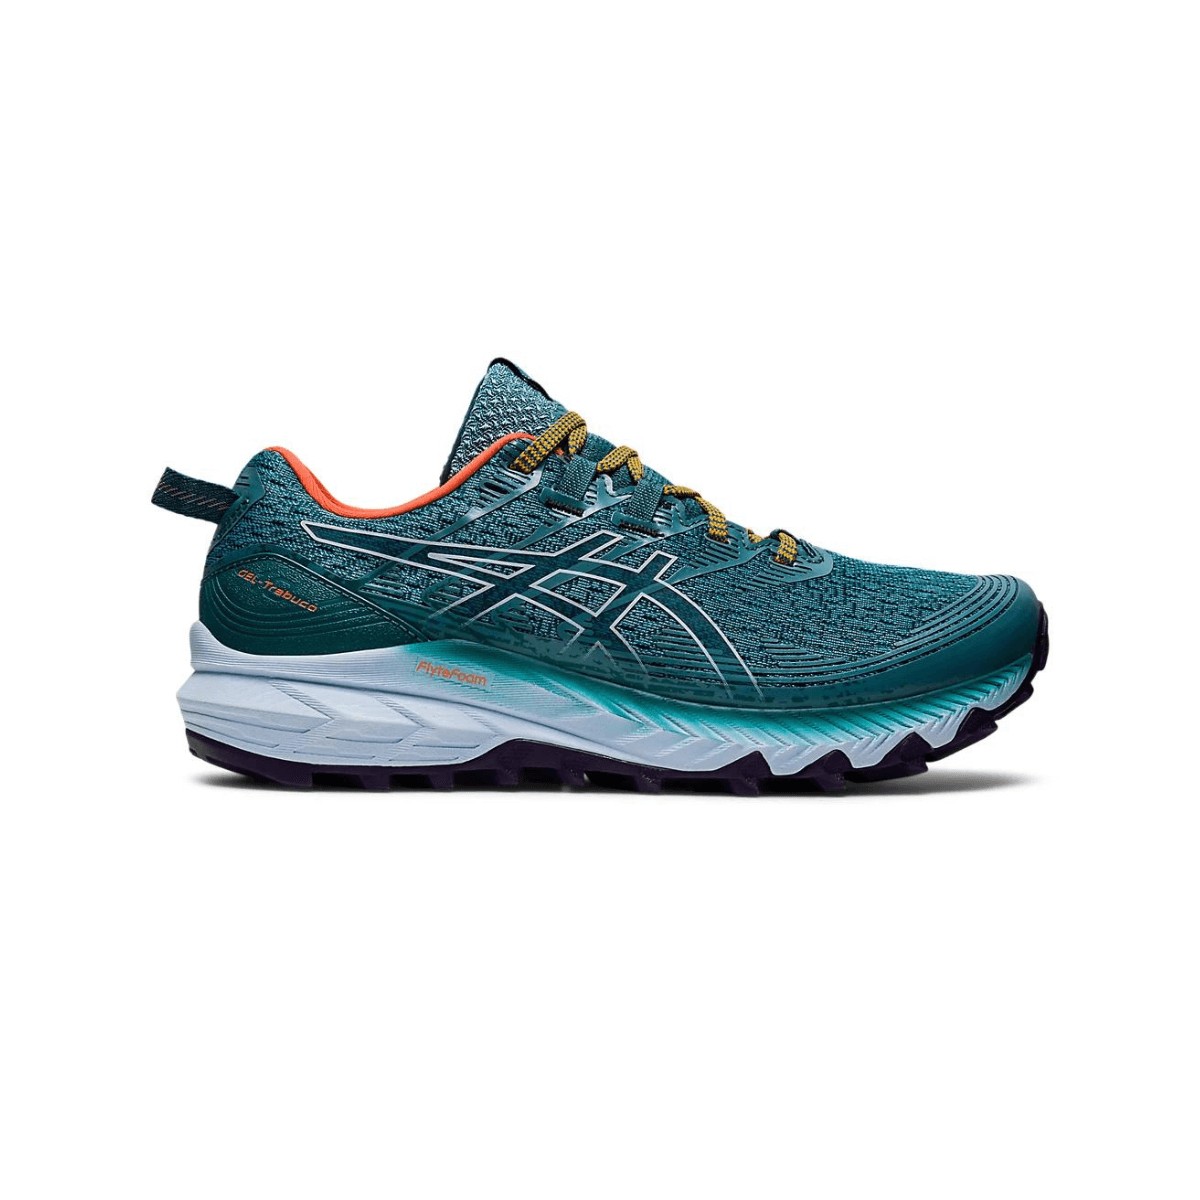 Chaussures Asics GEL-Trabuco 10 Turquoise Jaune Femmes AW22, Taille 39 - EUR